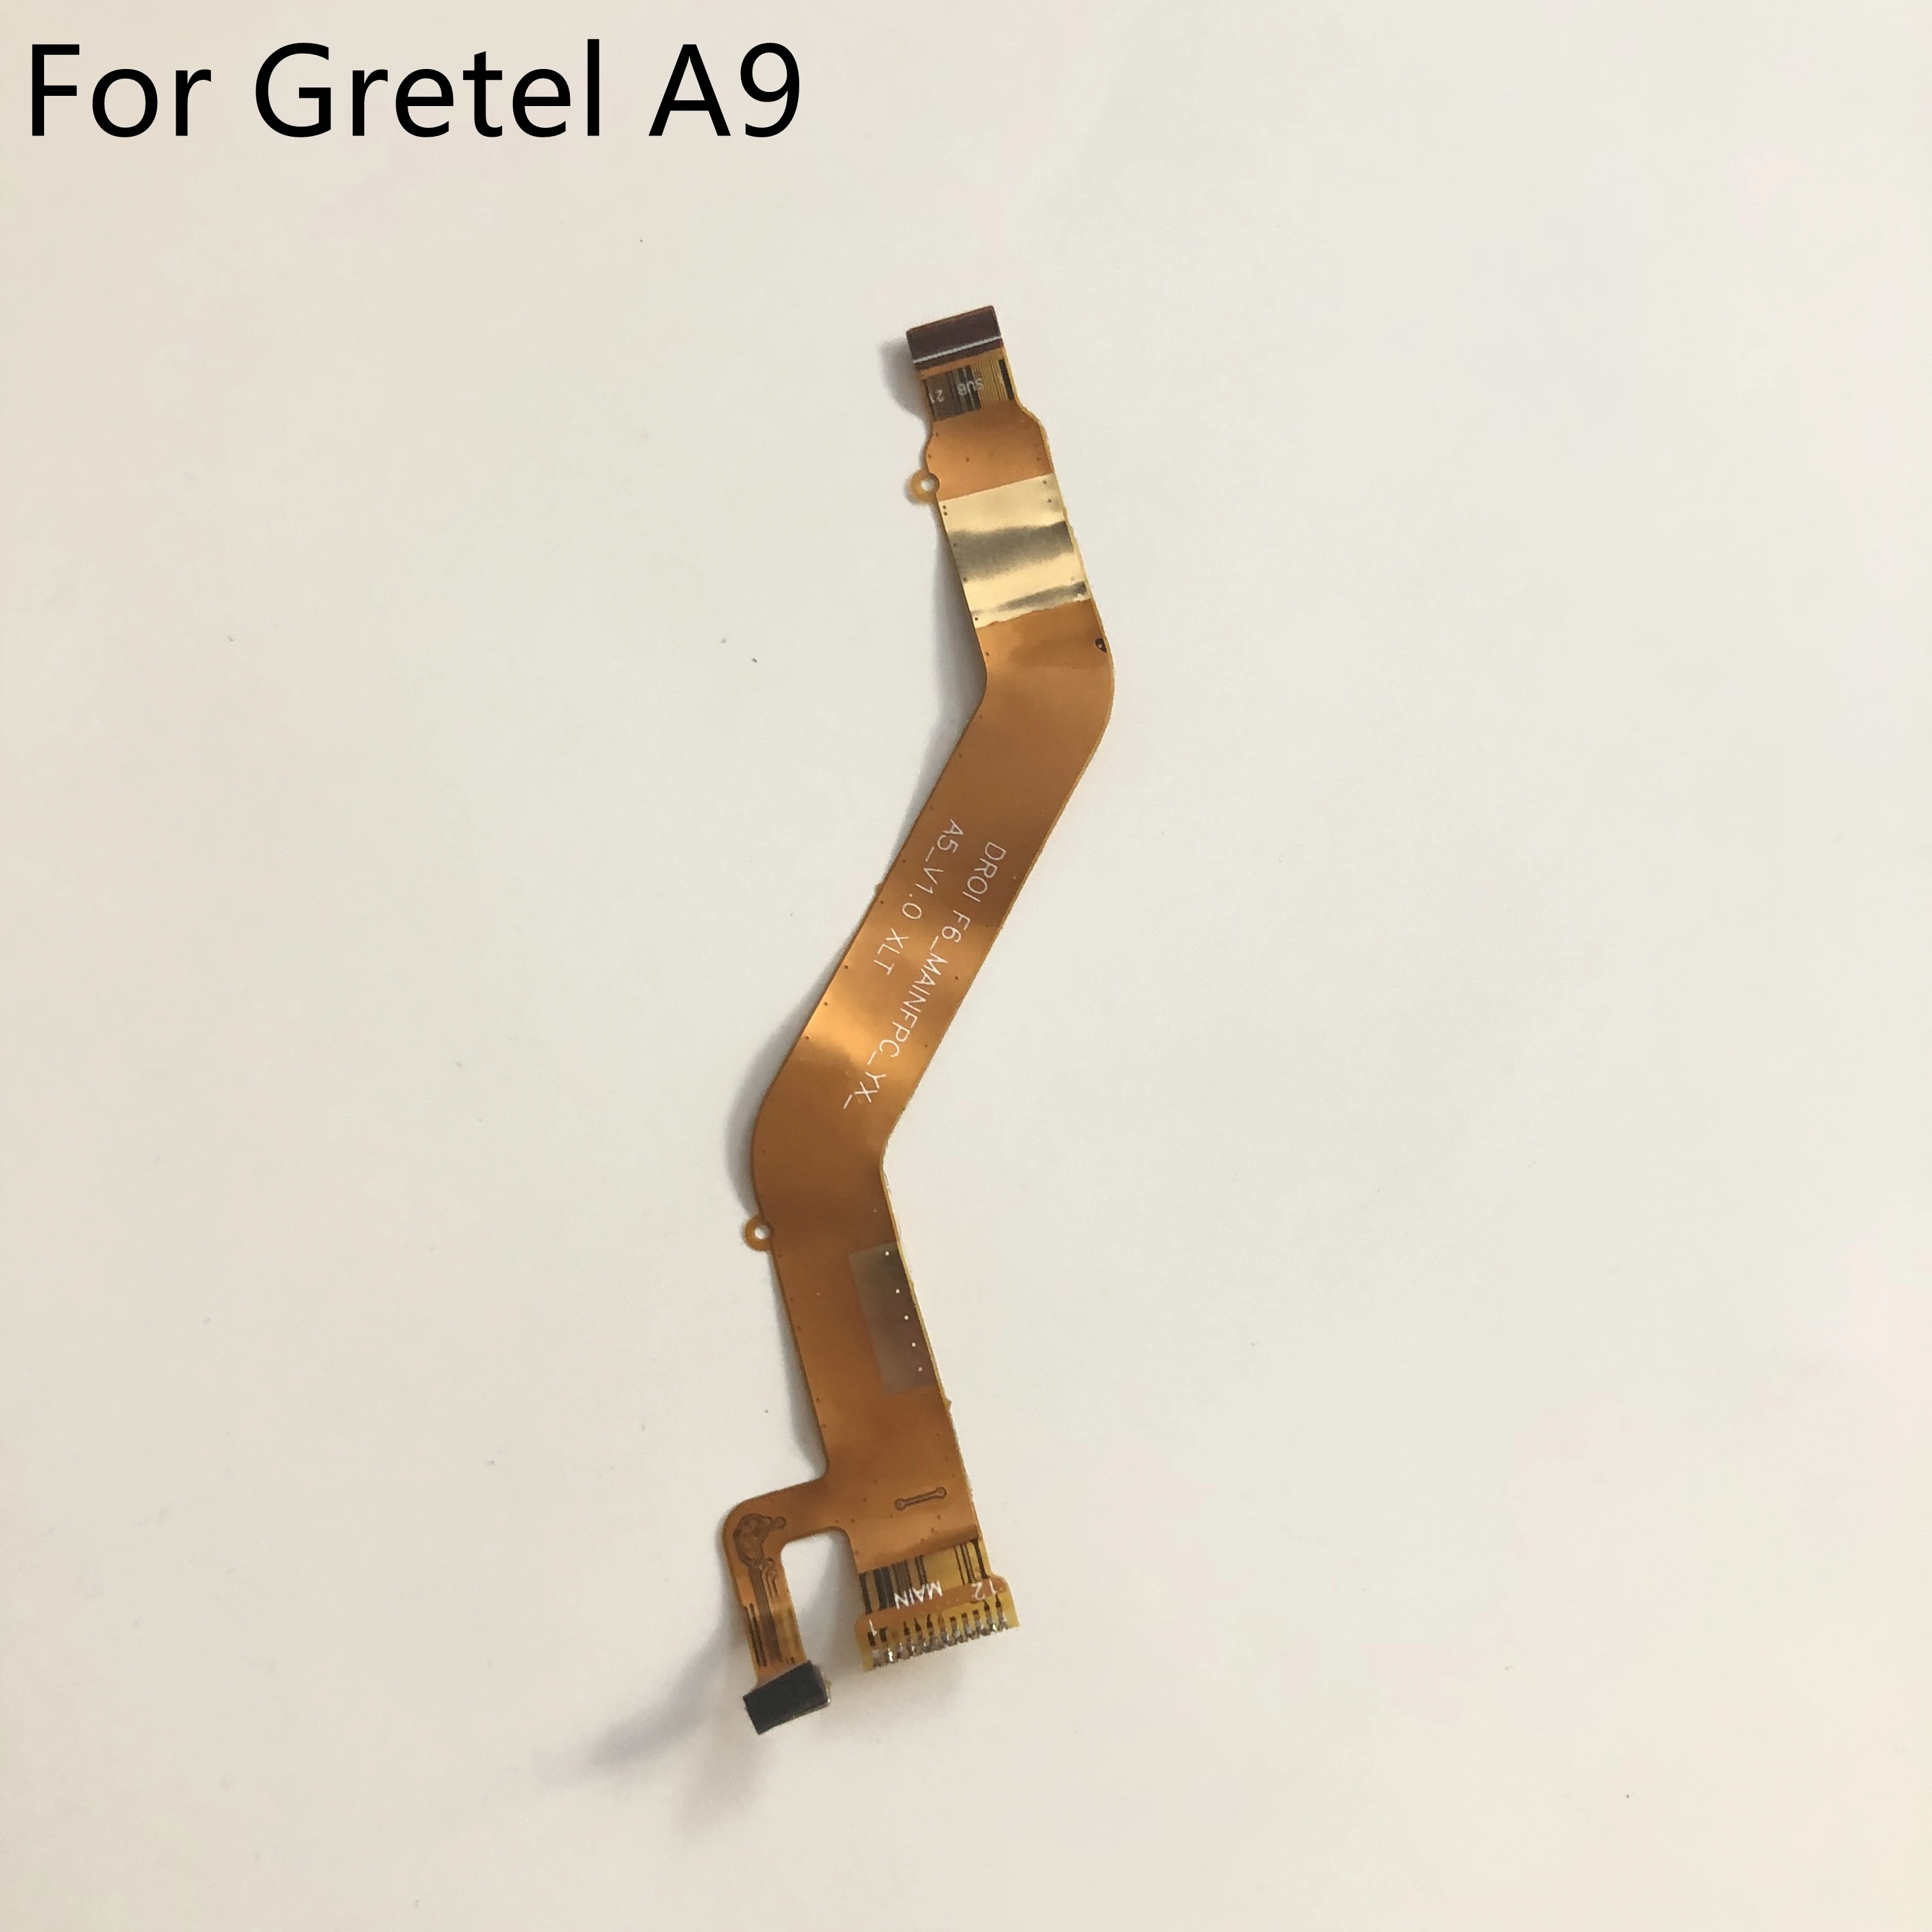 Gretel A9  USB Charge Board to Motherboard FPC For Gretel A9 MT6737 Quad Core 5.0" 720 x 1280 Free Shipping